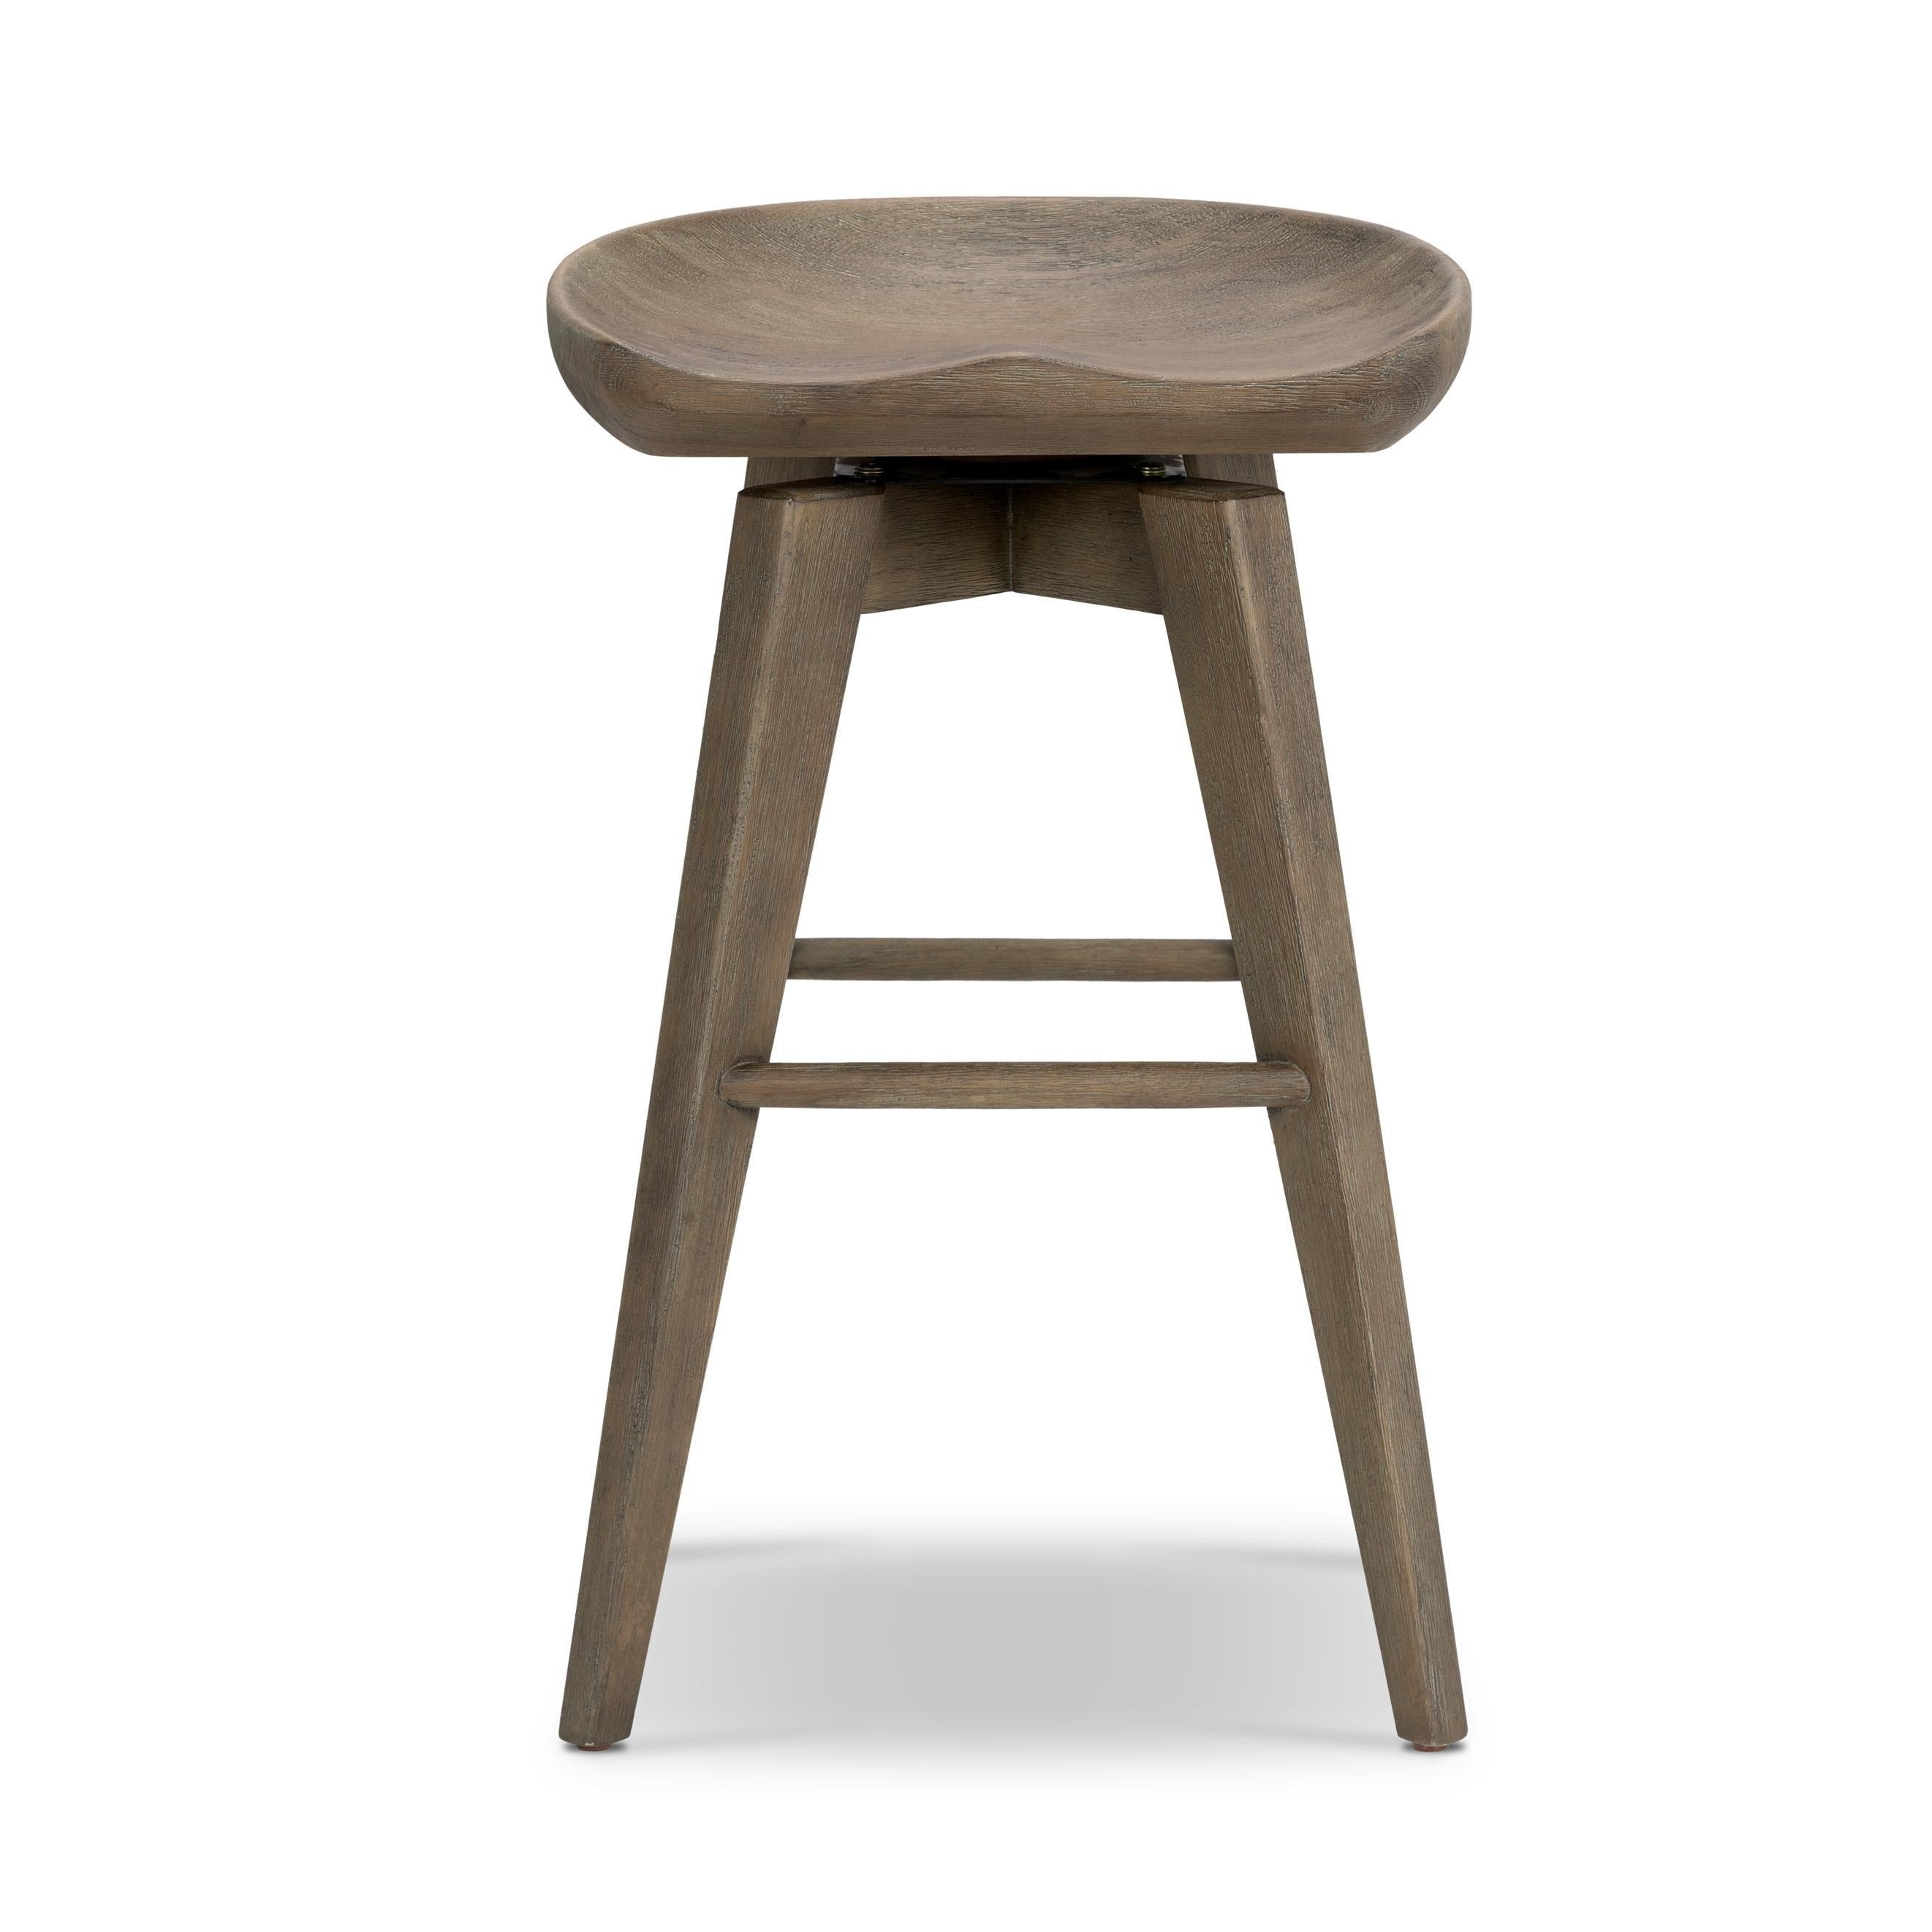 A fresh spin on bar seating, the parawood Paramore Swivel Counter Stool is finished in a deep charcoal for a clean, sleek look. The stool is topped with a swivel. Amethyst Home provides interior design, new home construction design consulting, vintage area rugs, and lighting in the San Diego metro area.